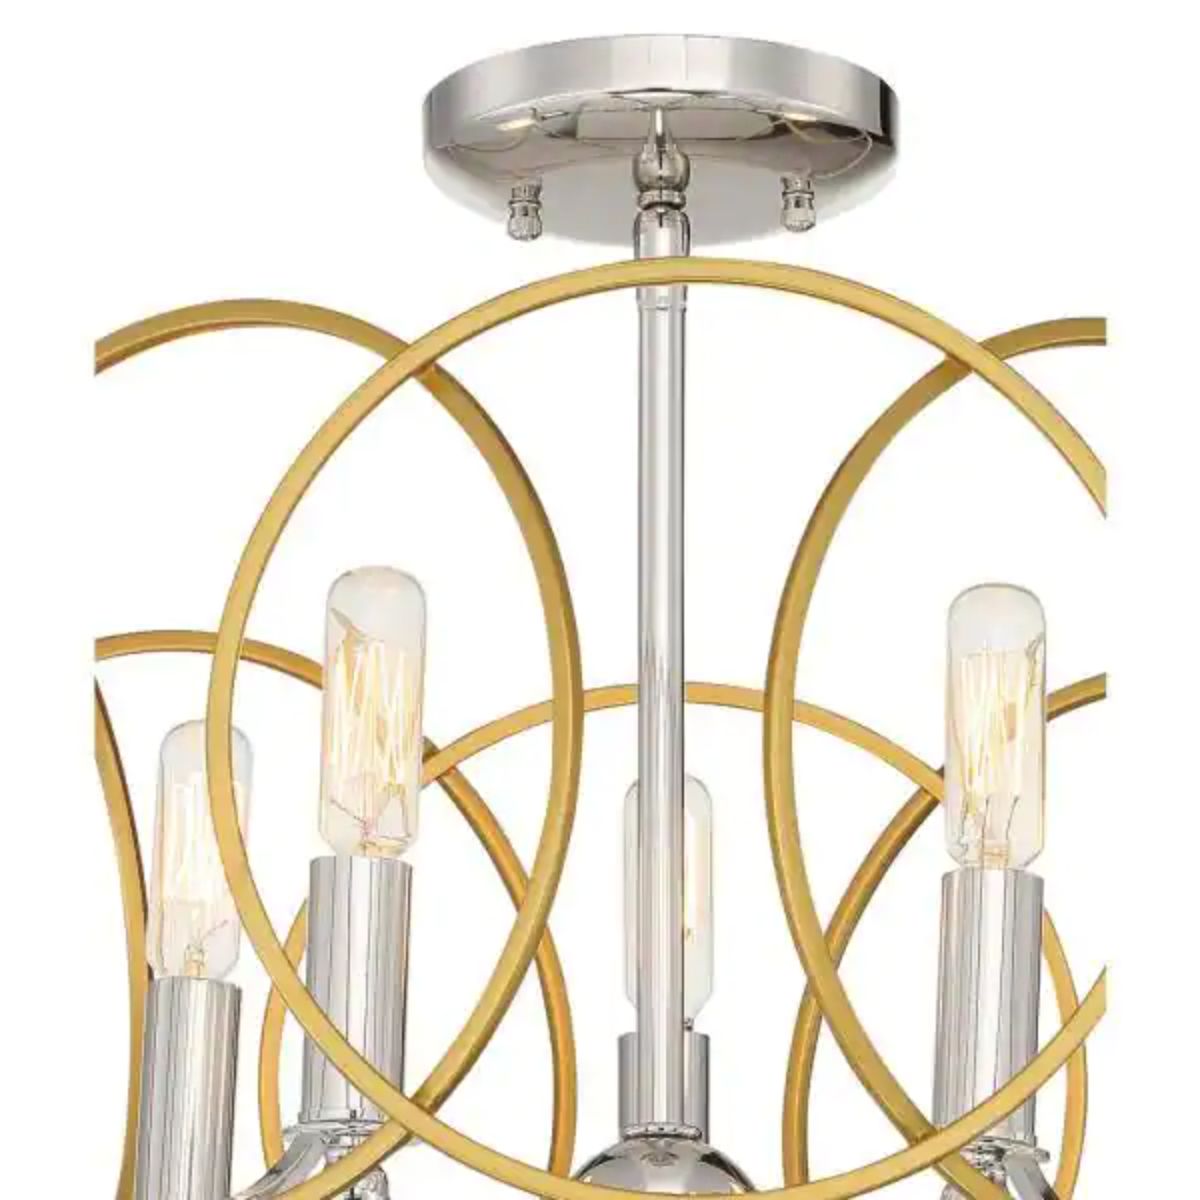 Chassell 18 in. 5 Lights Semi flush Mount Light Gold & Polished Nickel finish